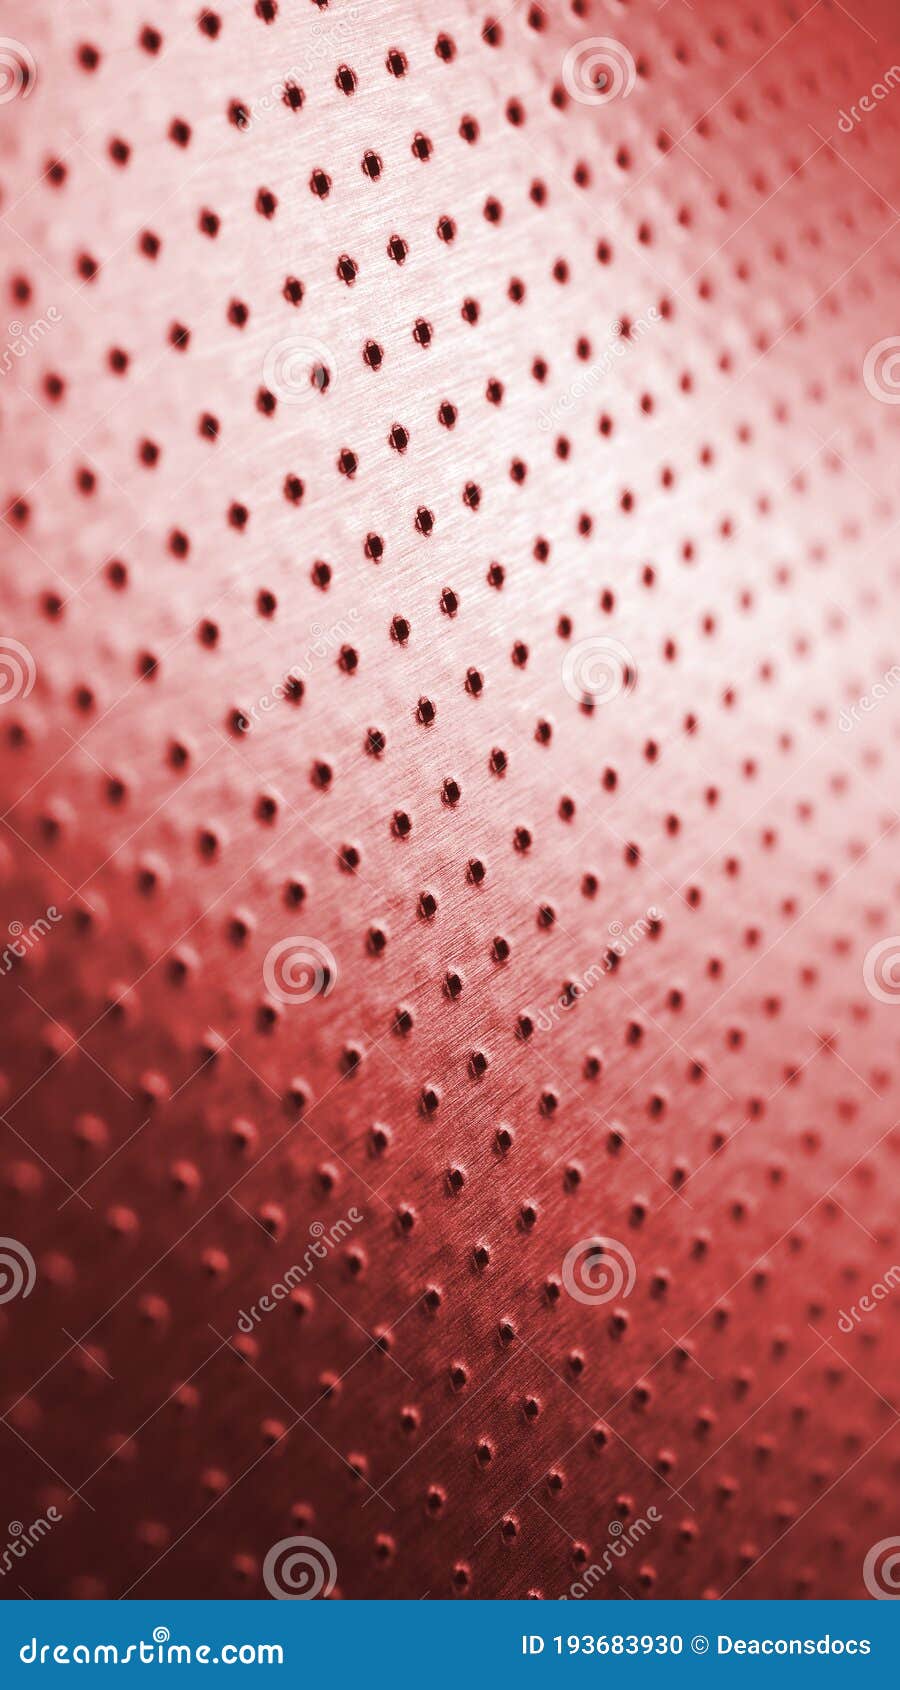 Tinted Red Metal Background with Bright Saturated Color. Dark Vertical  Wallpaper for Mobile Stock Photo - Image of vertical, design: 193683930